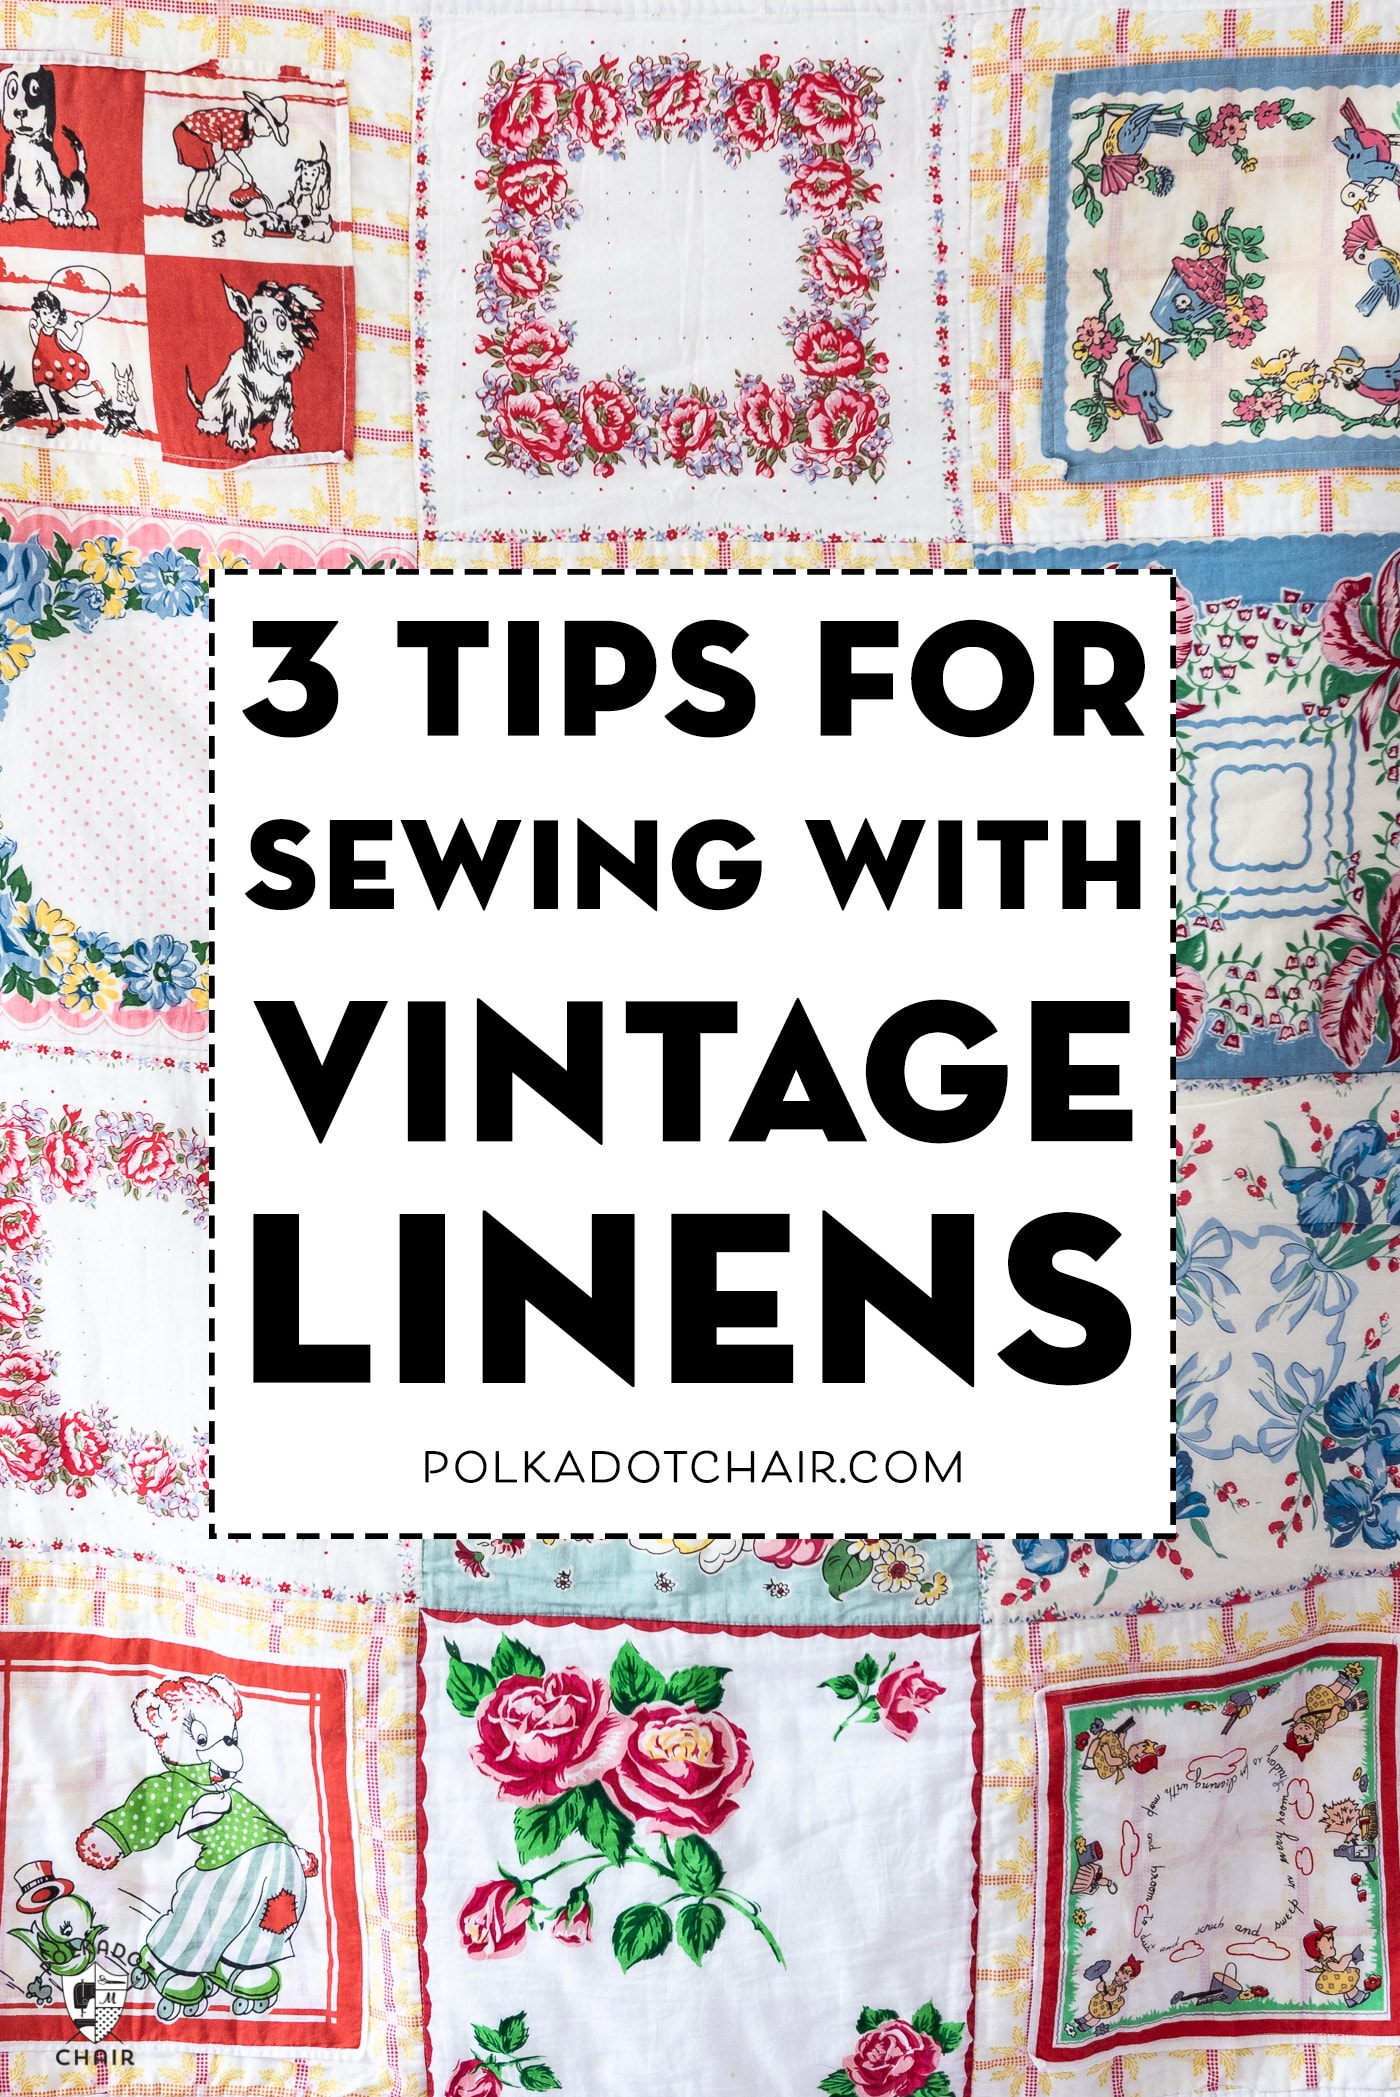 3 Tips for Sewing with Vintage Linens